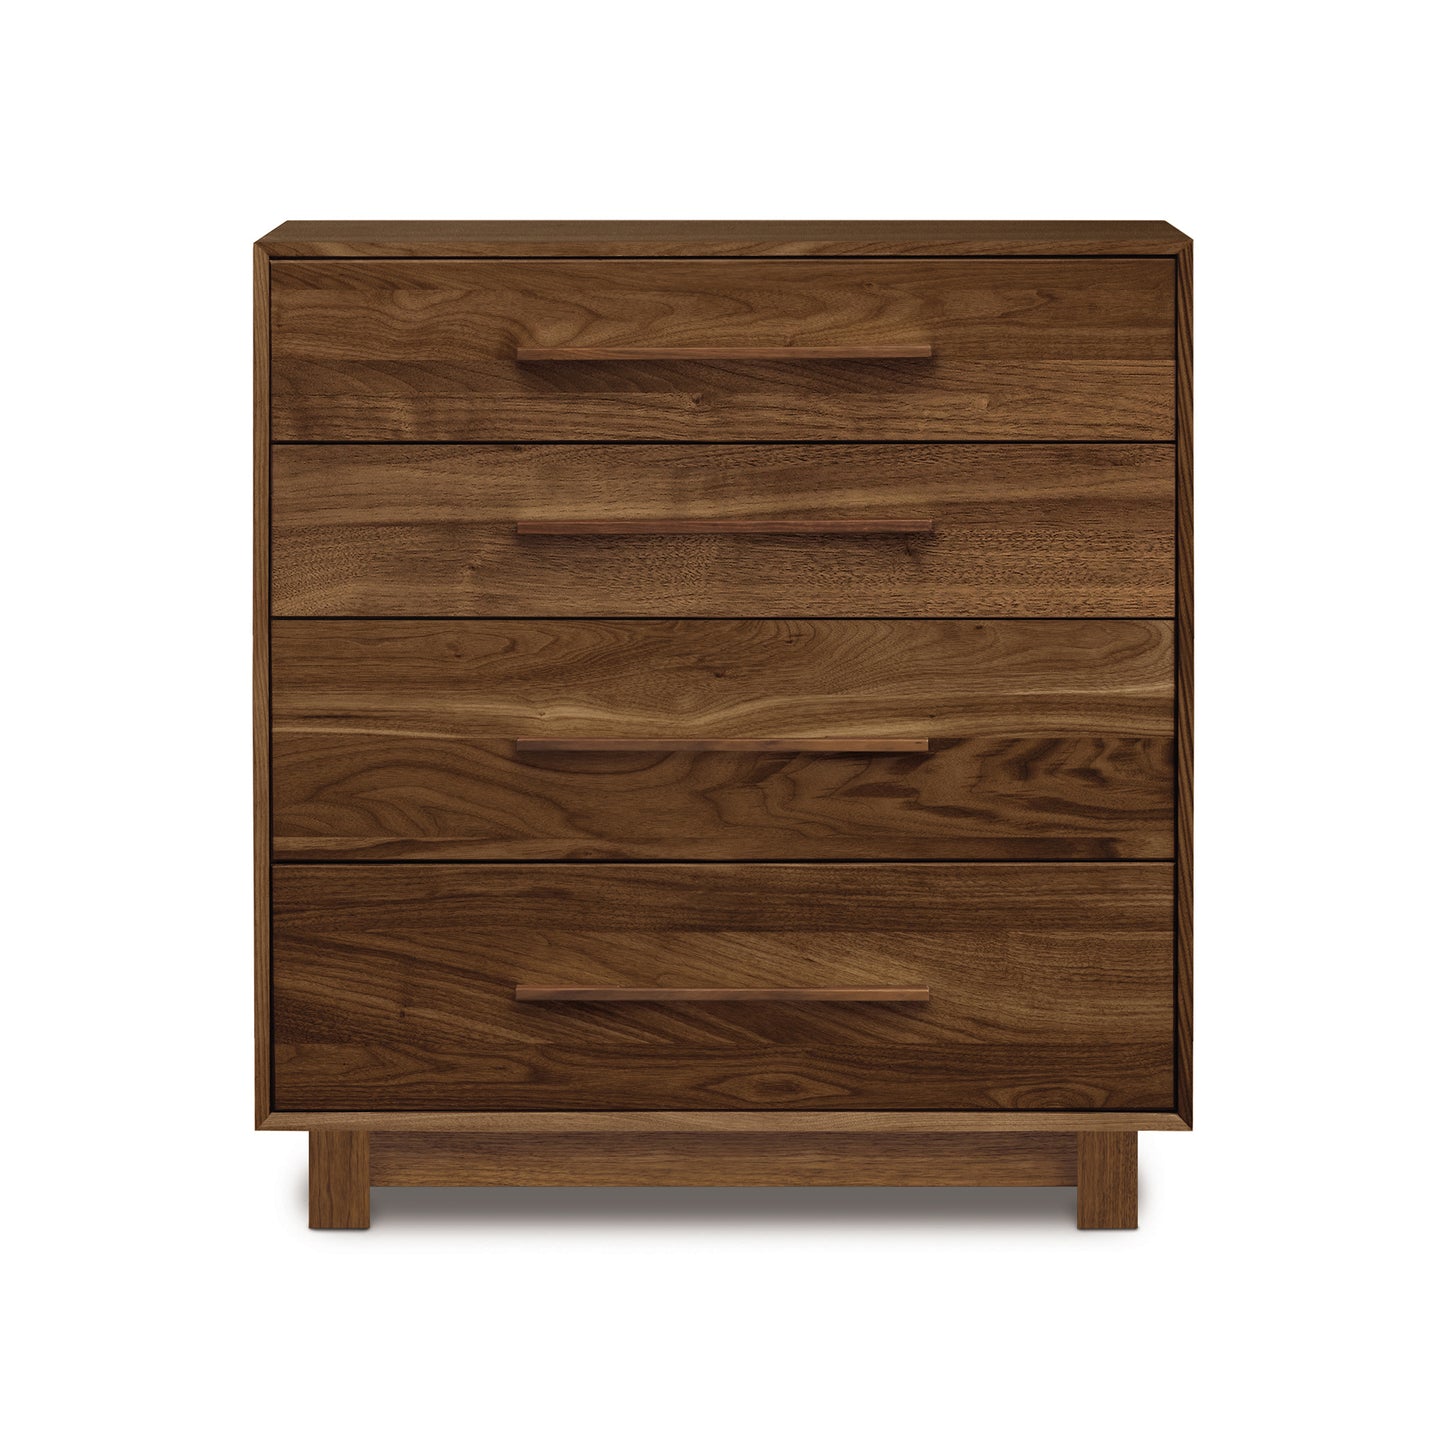 A contemporary Copeland Furniture Sloane 4-Drawer Chest, featuring four horizontal pull-out drawers with a dark finish, isolated against a white background.